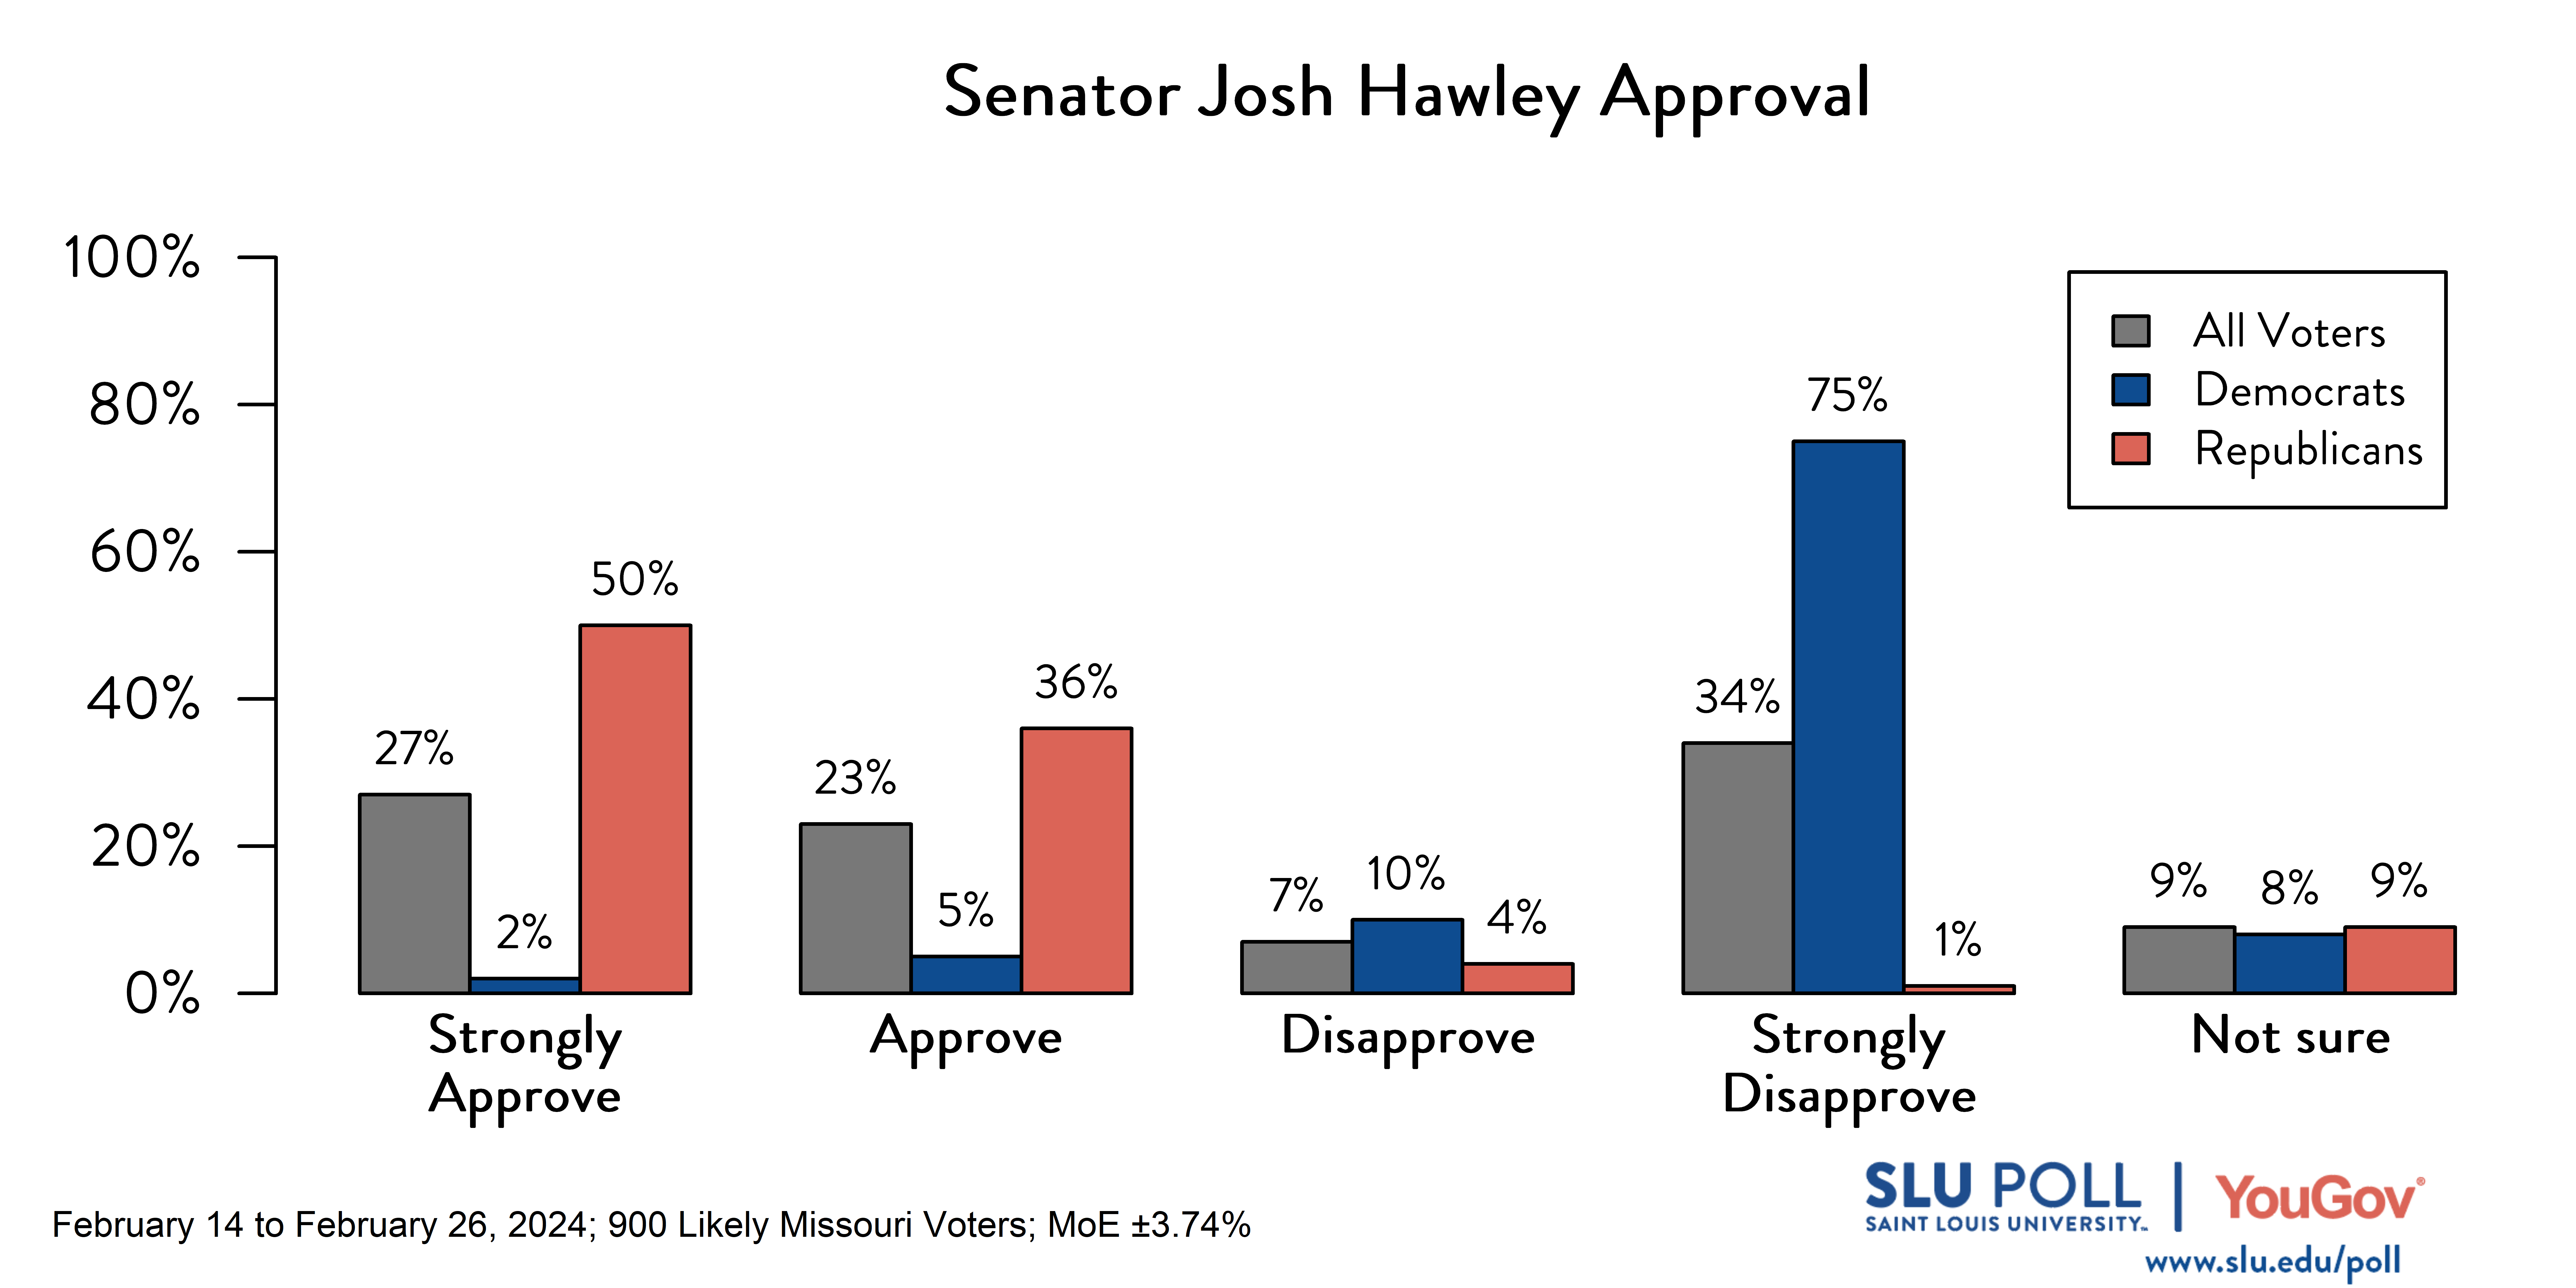 Bar graph of SLU/YouGov Poll results for Josh Hawley approval question. Results in caption